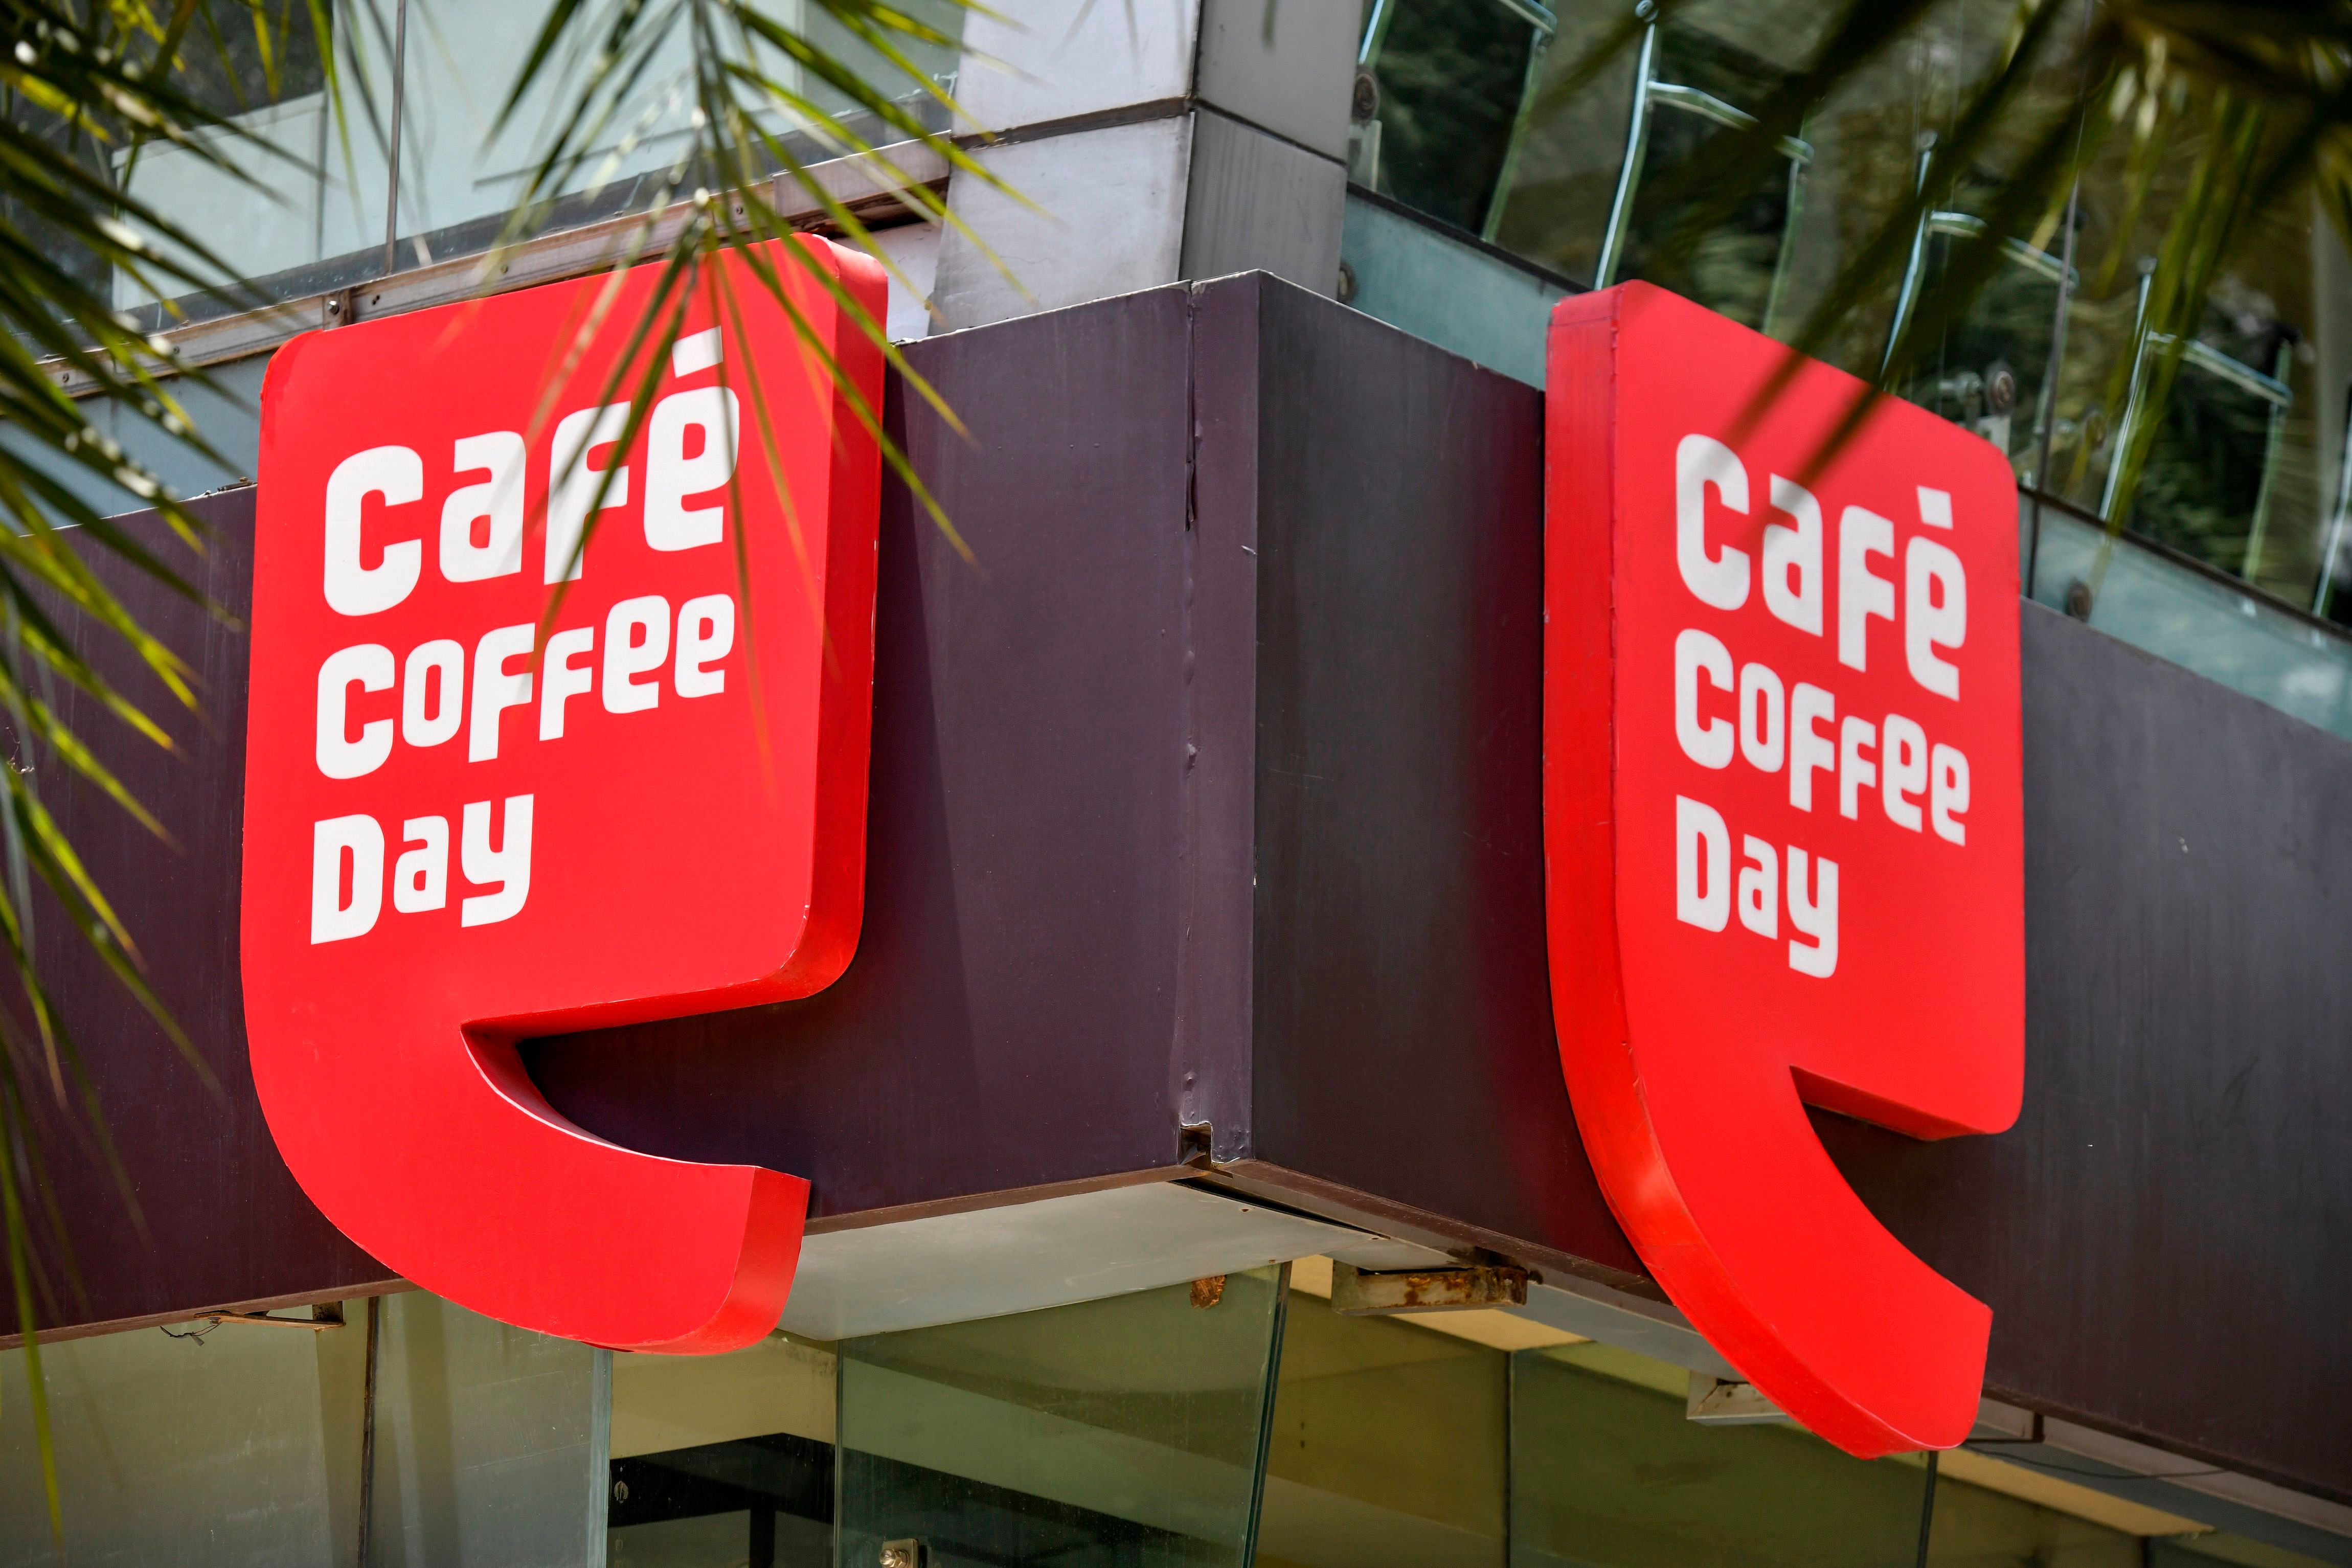 Till Café Coffee Day came along, espresso for many Indians was a milky, overly sweet something that passed off for coffee sprinkled with drinking chocolate and served at weddings. (PTI Photo)